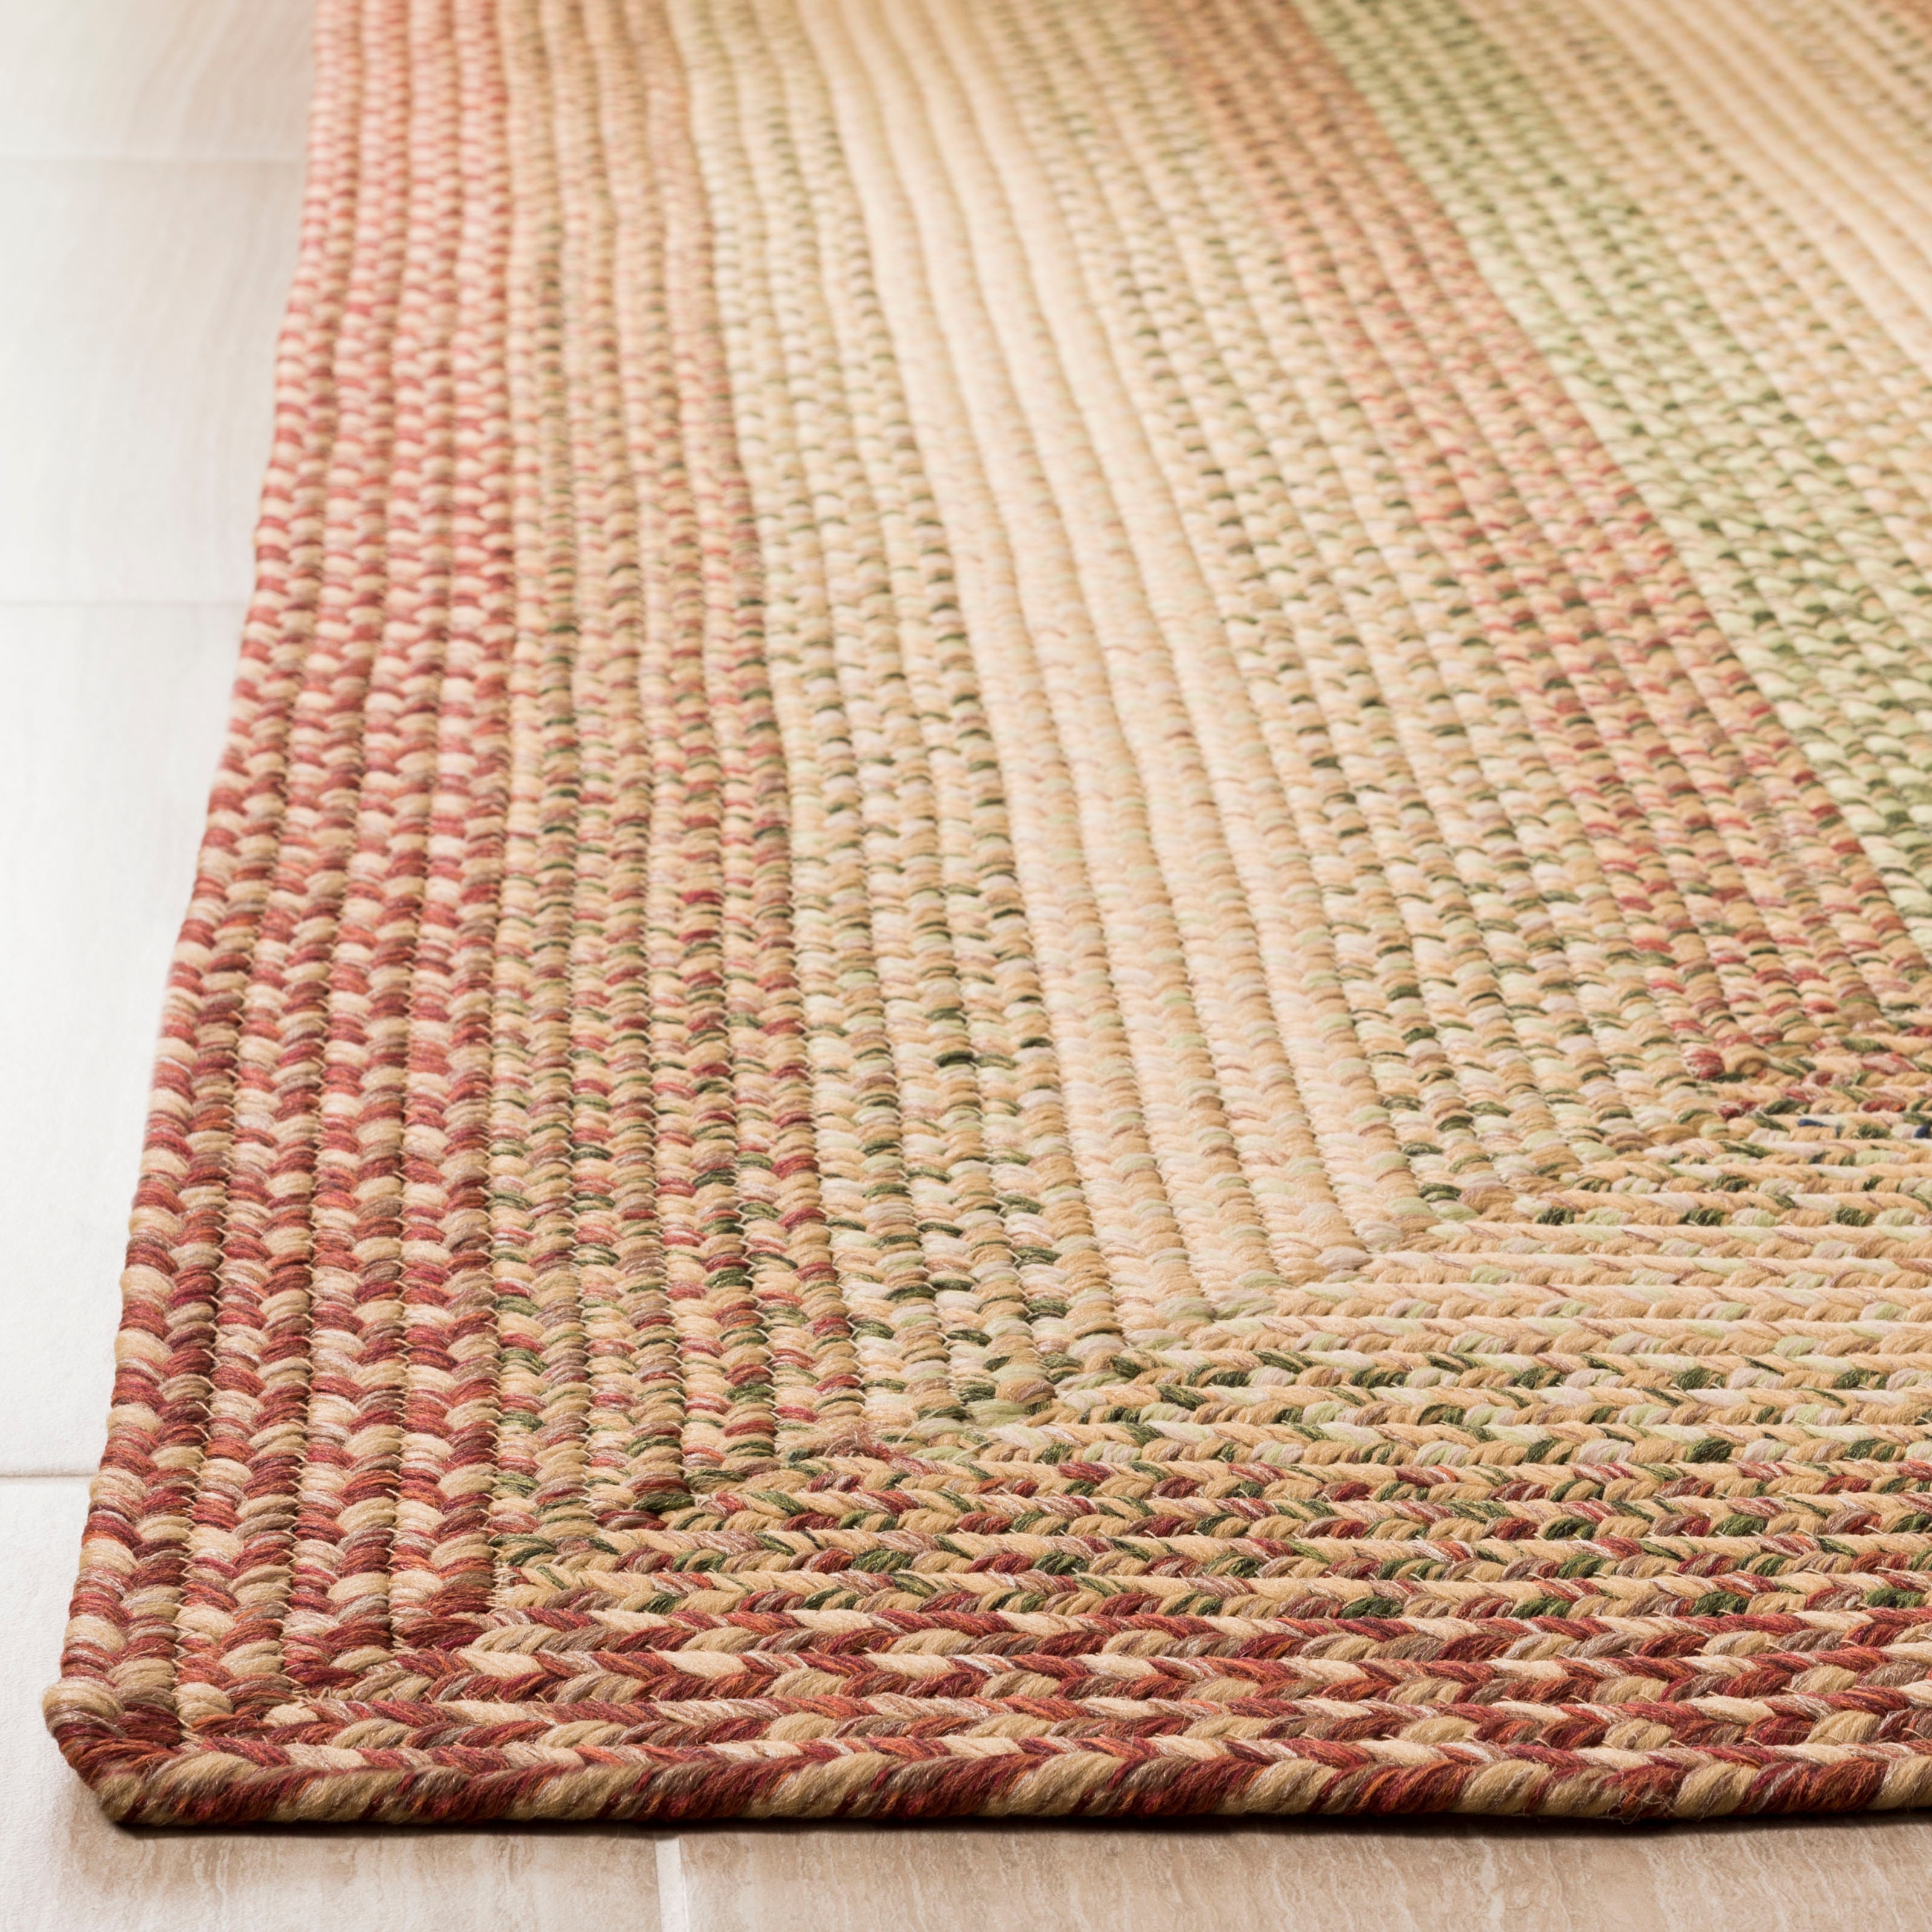 https://ak1.ostkcdn.com/images/products/is/images/direct/9c46490d4bc234c56ef0ea8f89b46e80cb791257/SAFAVIEH-Handmade-Braided-Jemima-Country-Rug.jpg